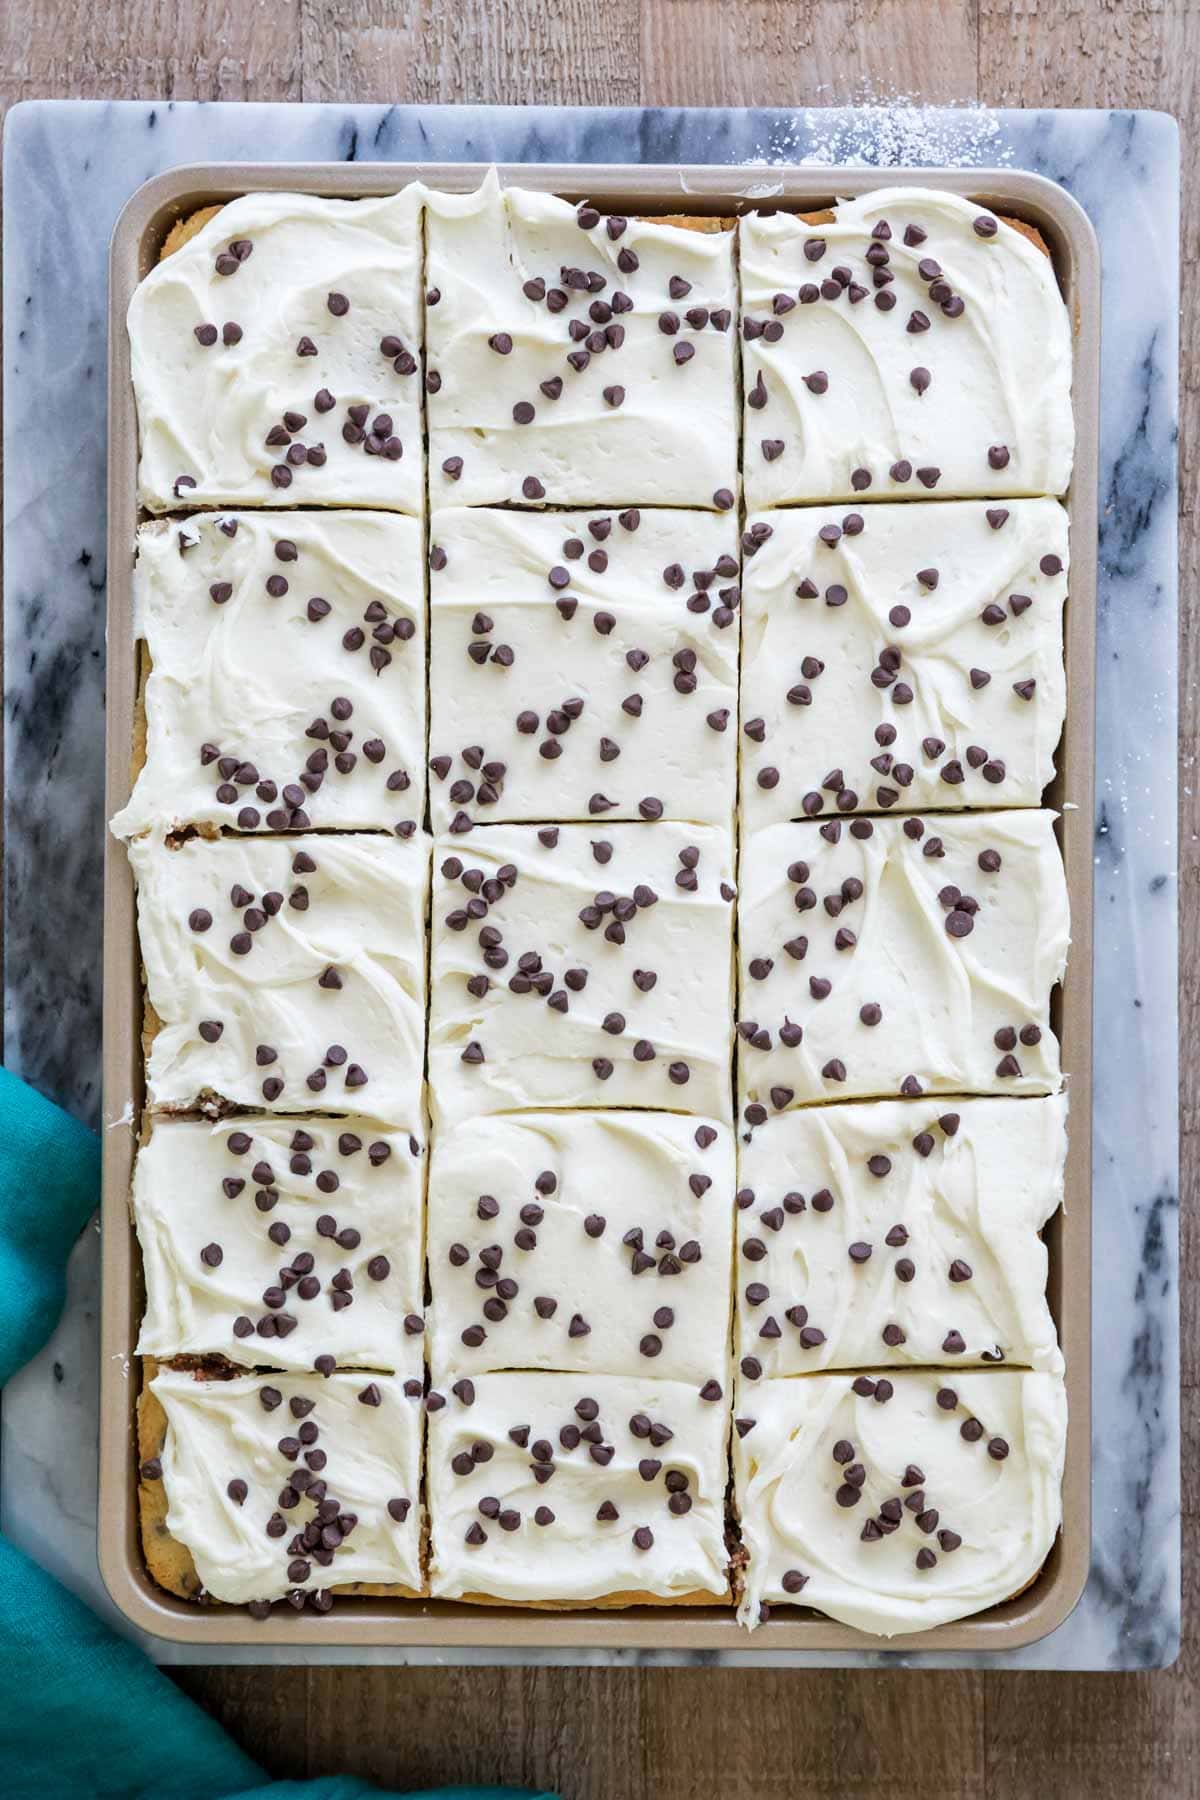 Overhead view of chocolate chip sheet cake baked in a gold jelly roll pan. Iced with white frosting and topped with chocolate chips